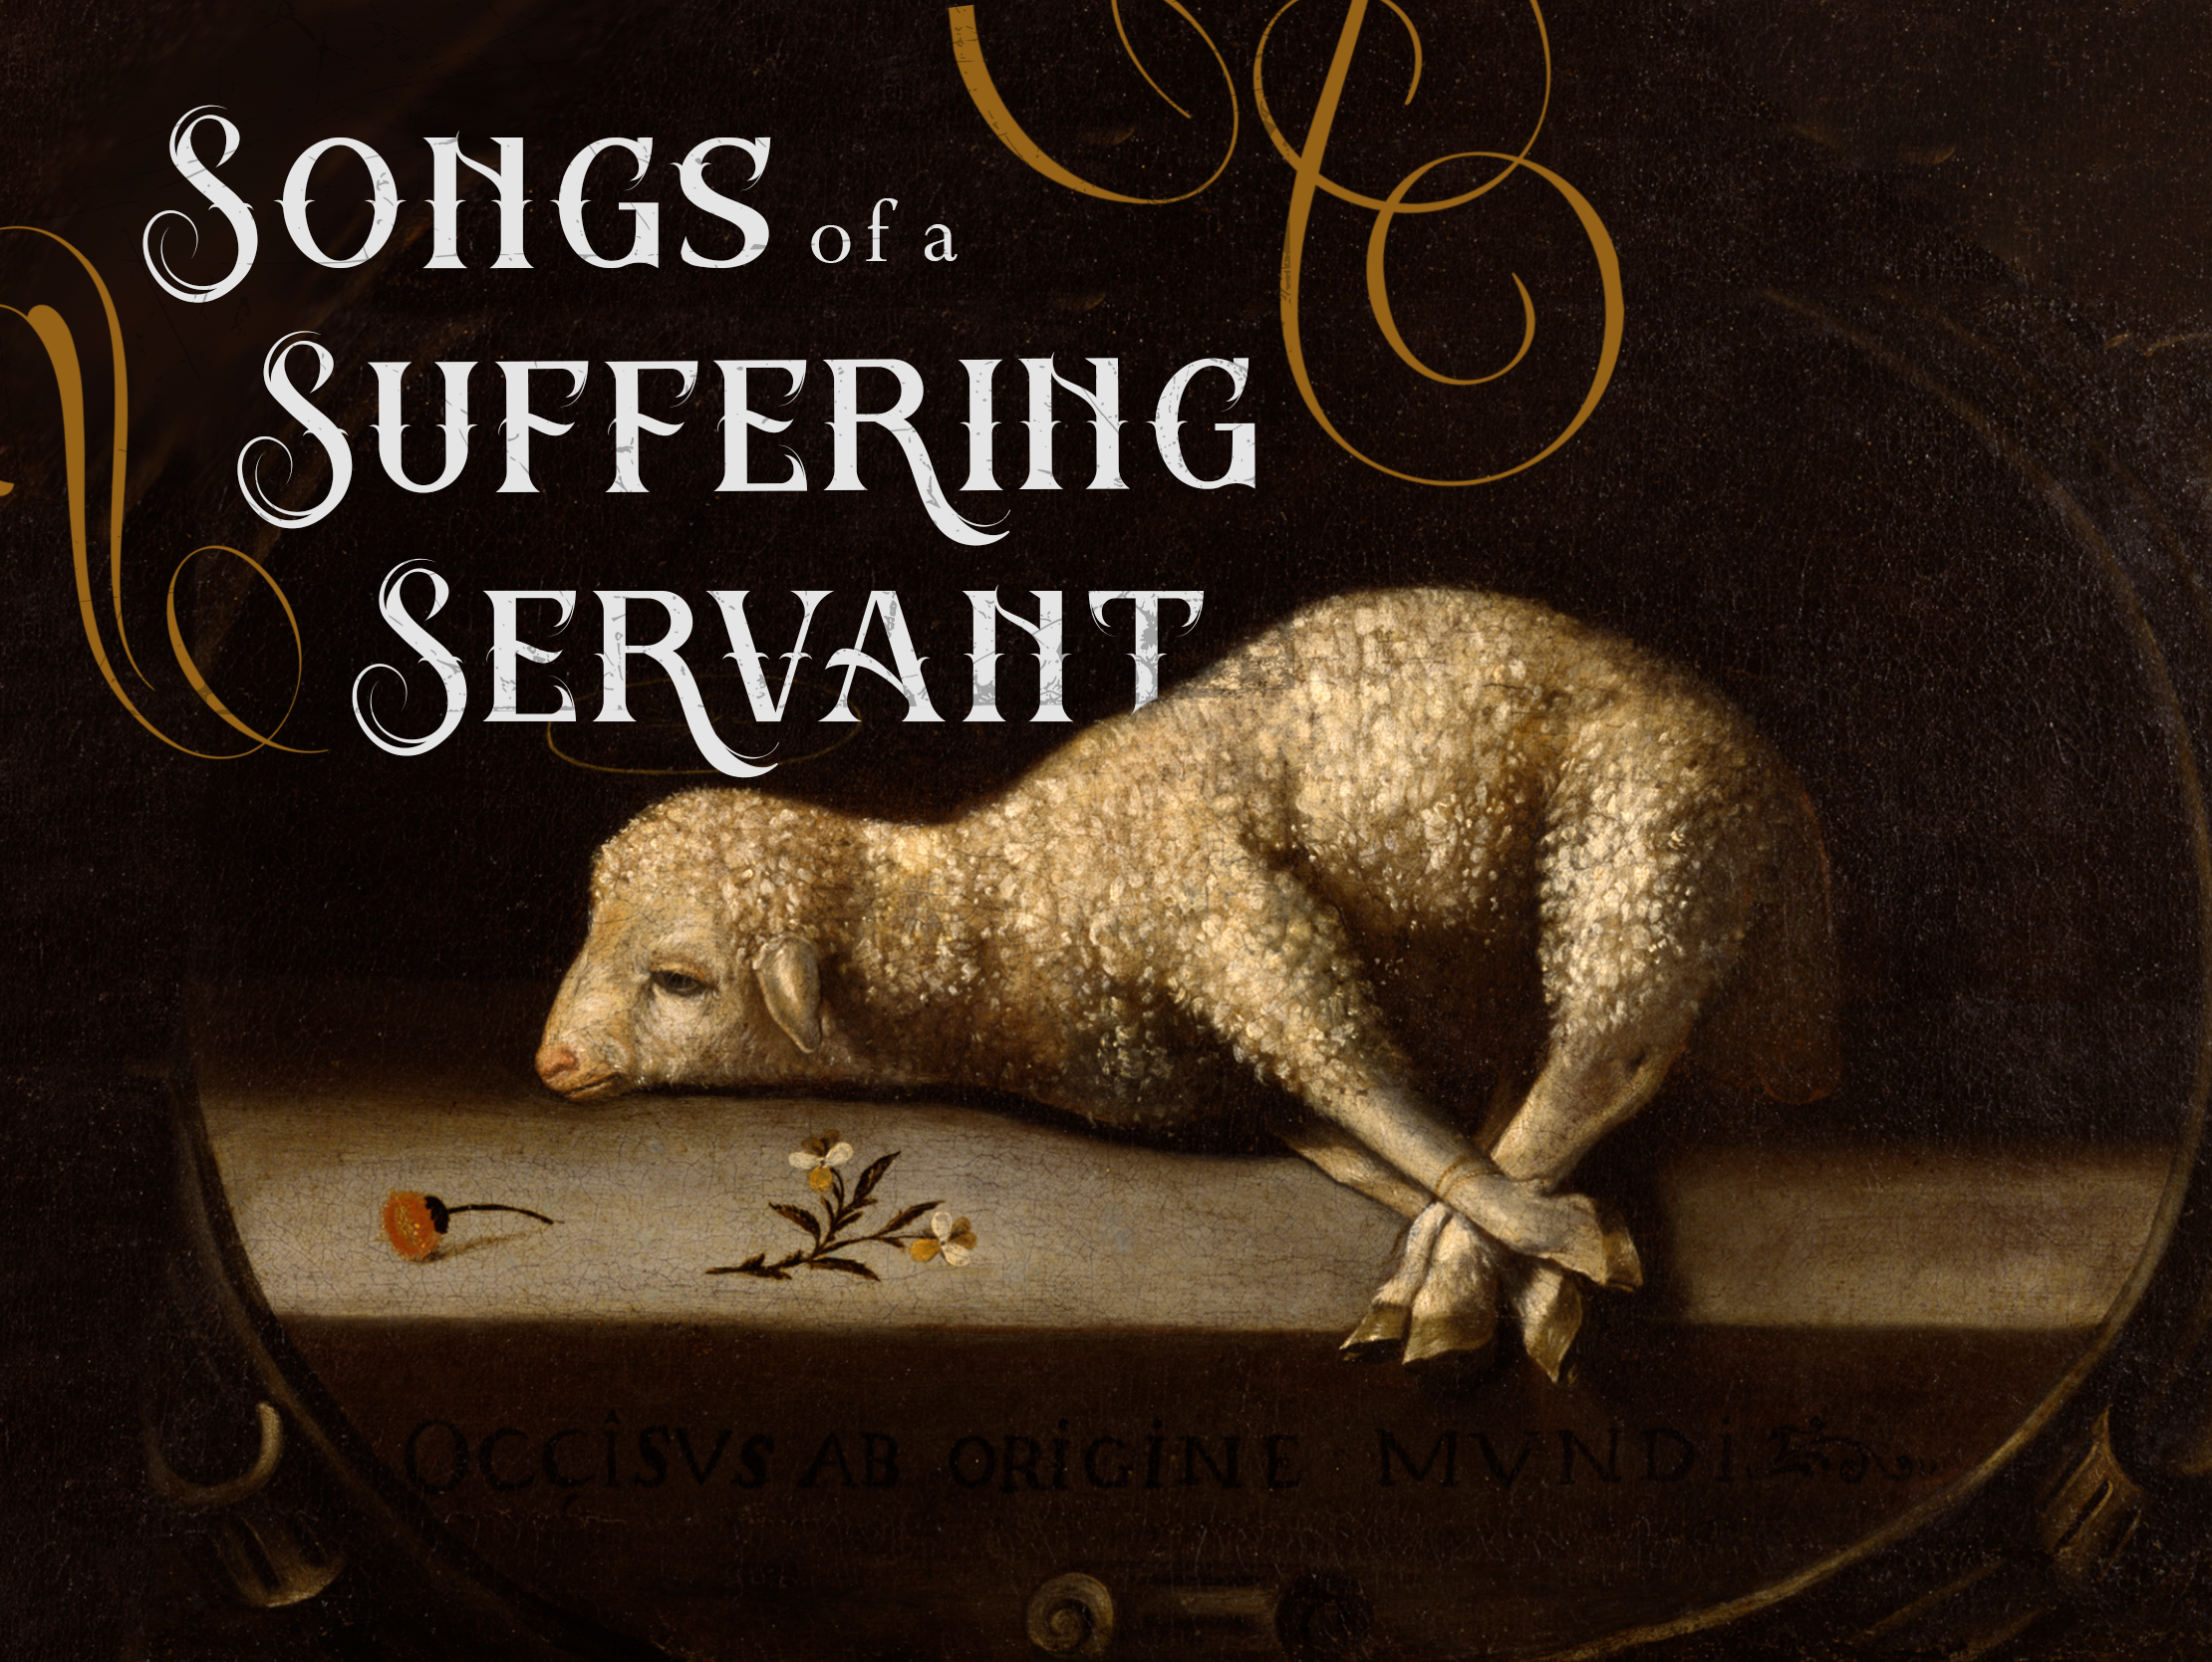 Songs of a Suffering Servant